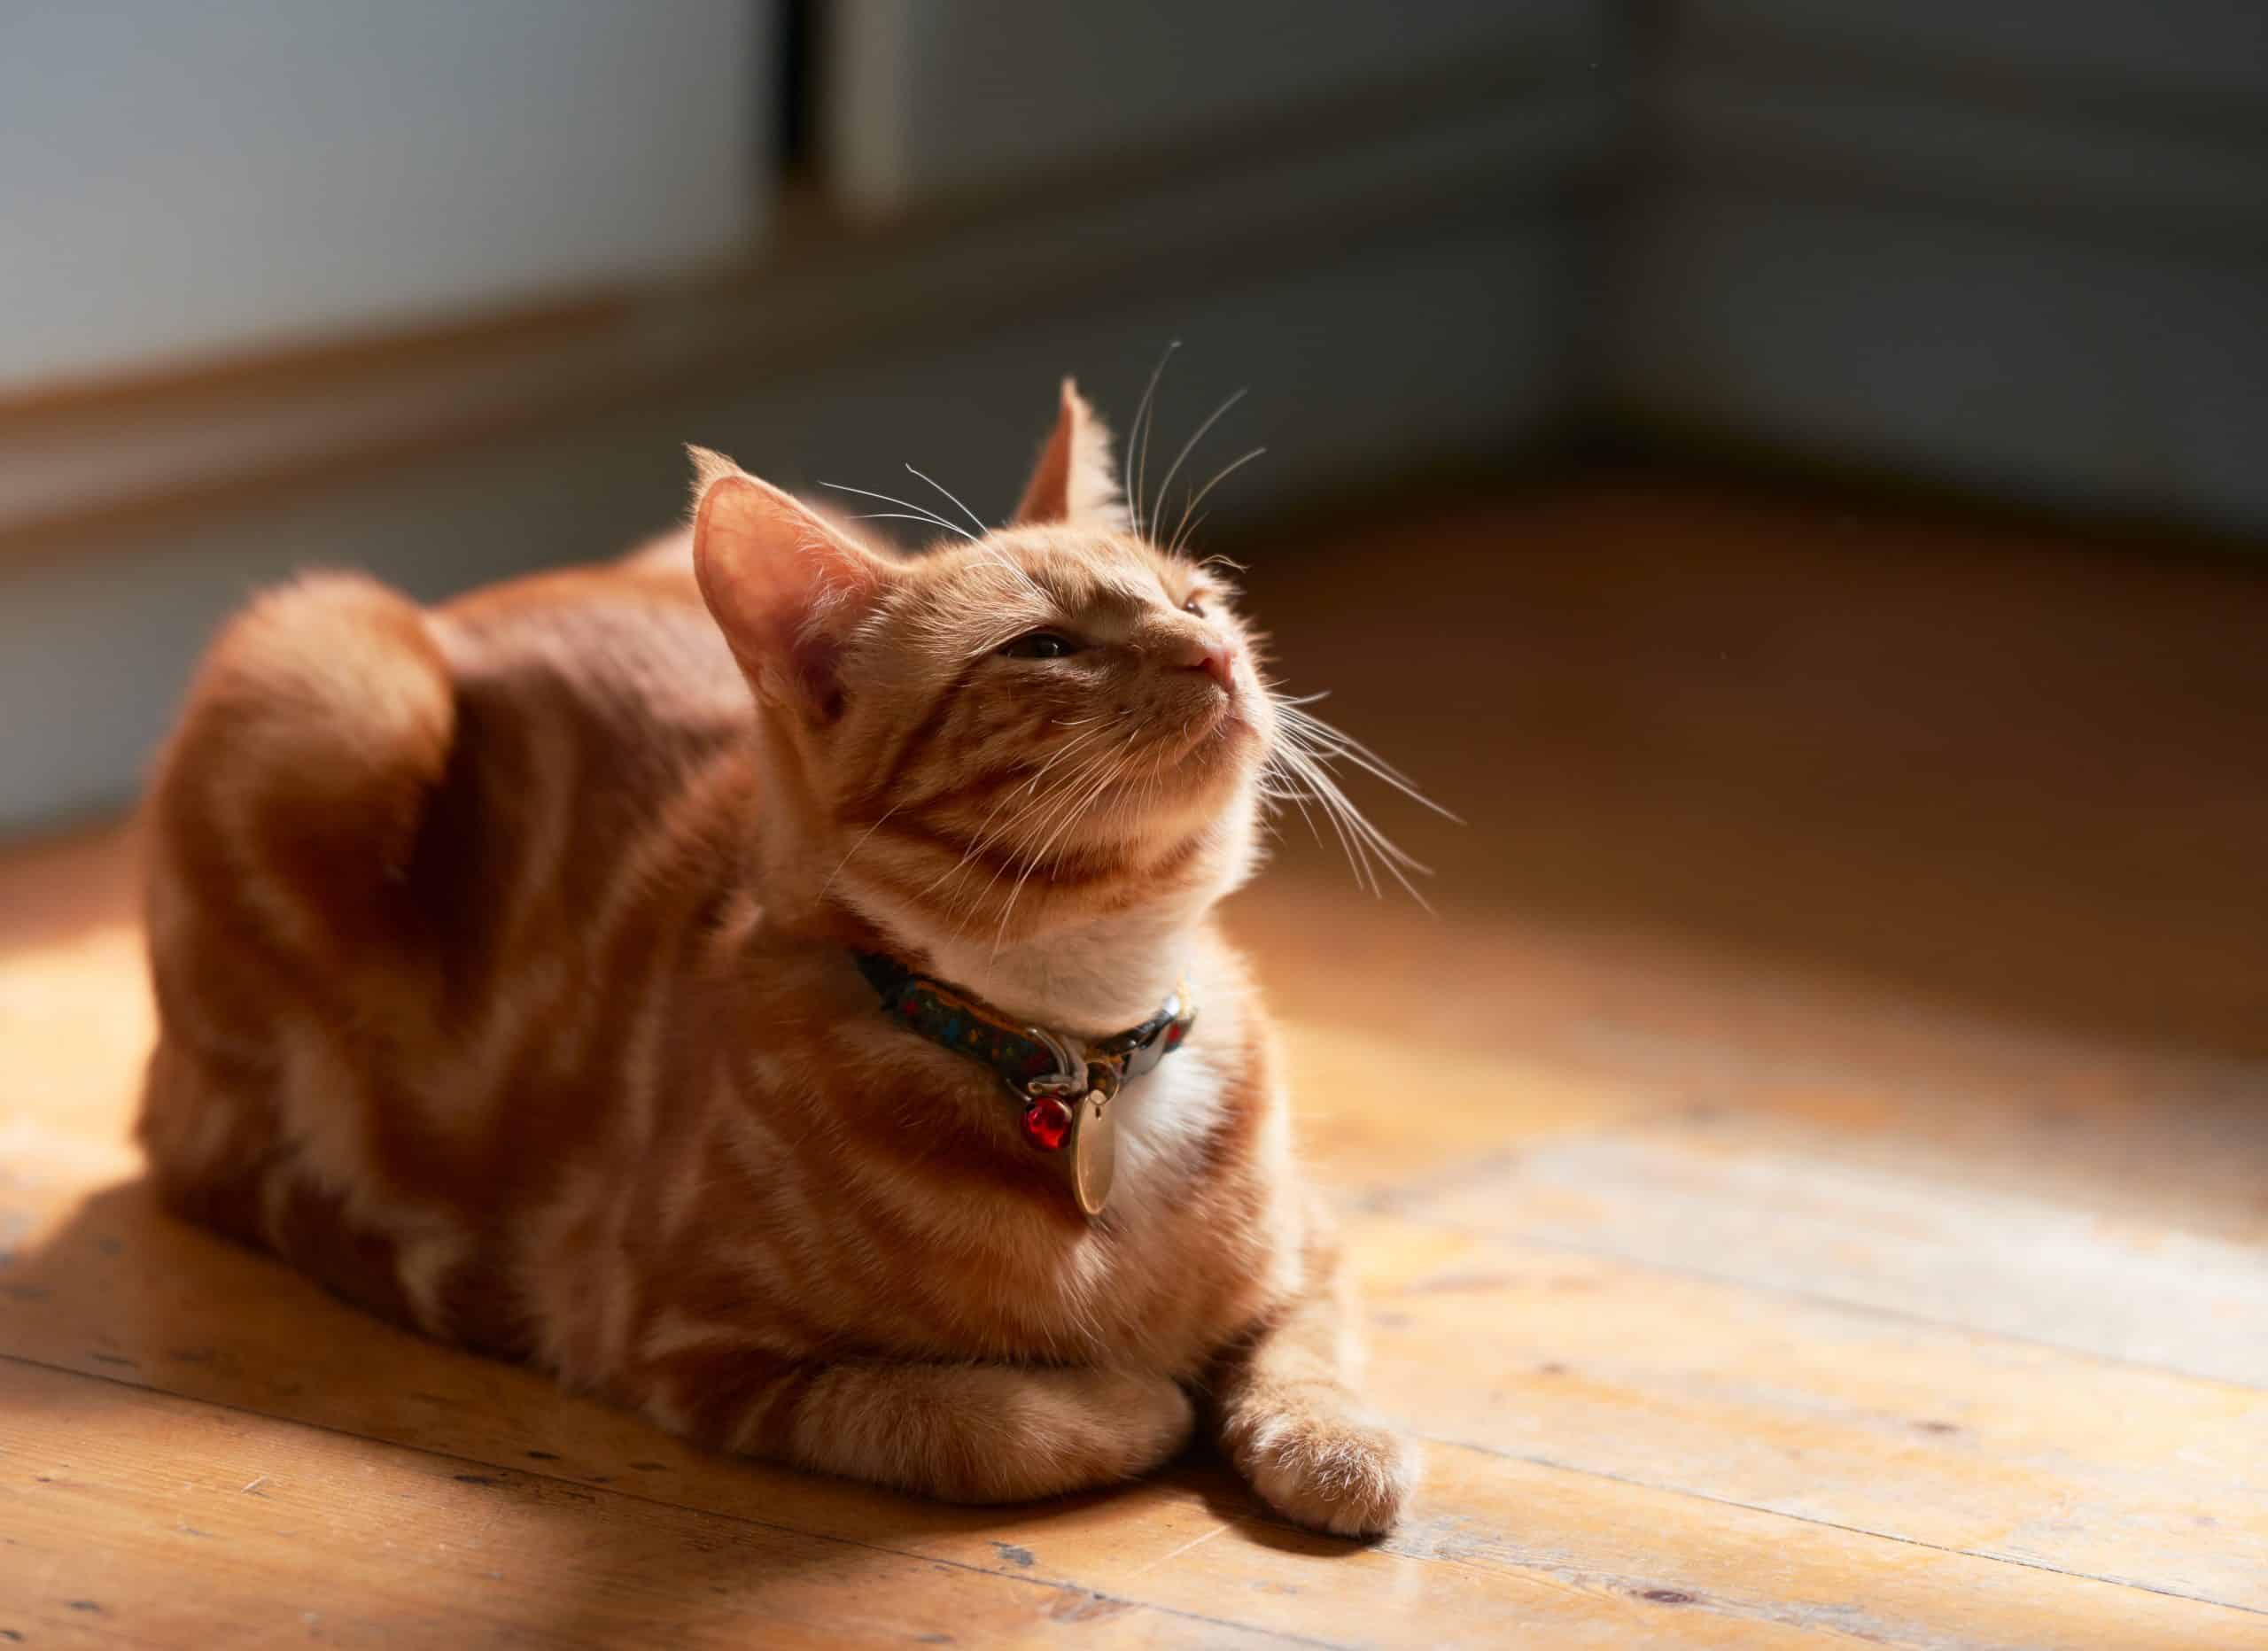 Adorable young ginger red tabby cat back lit laying on a wooden floor looking up